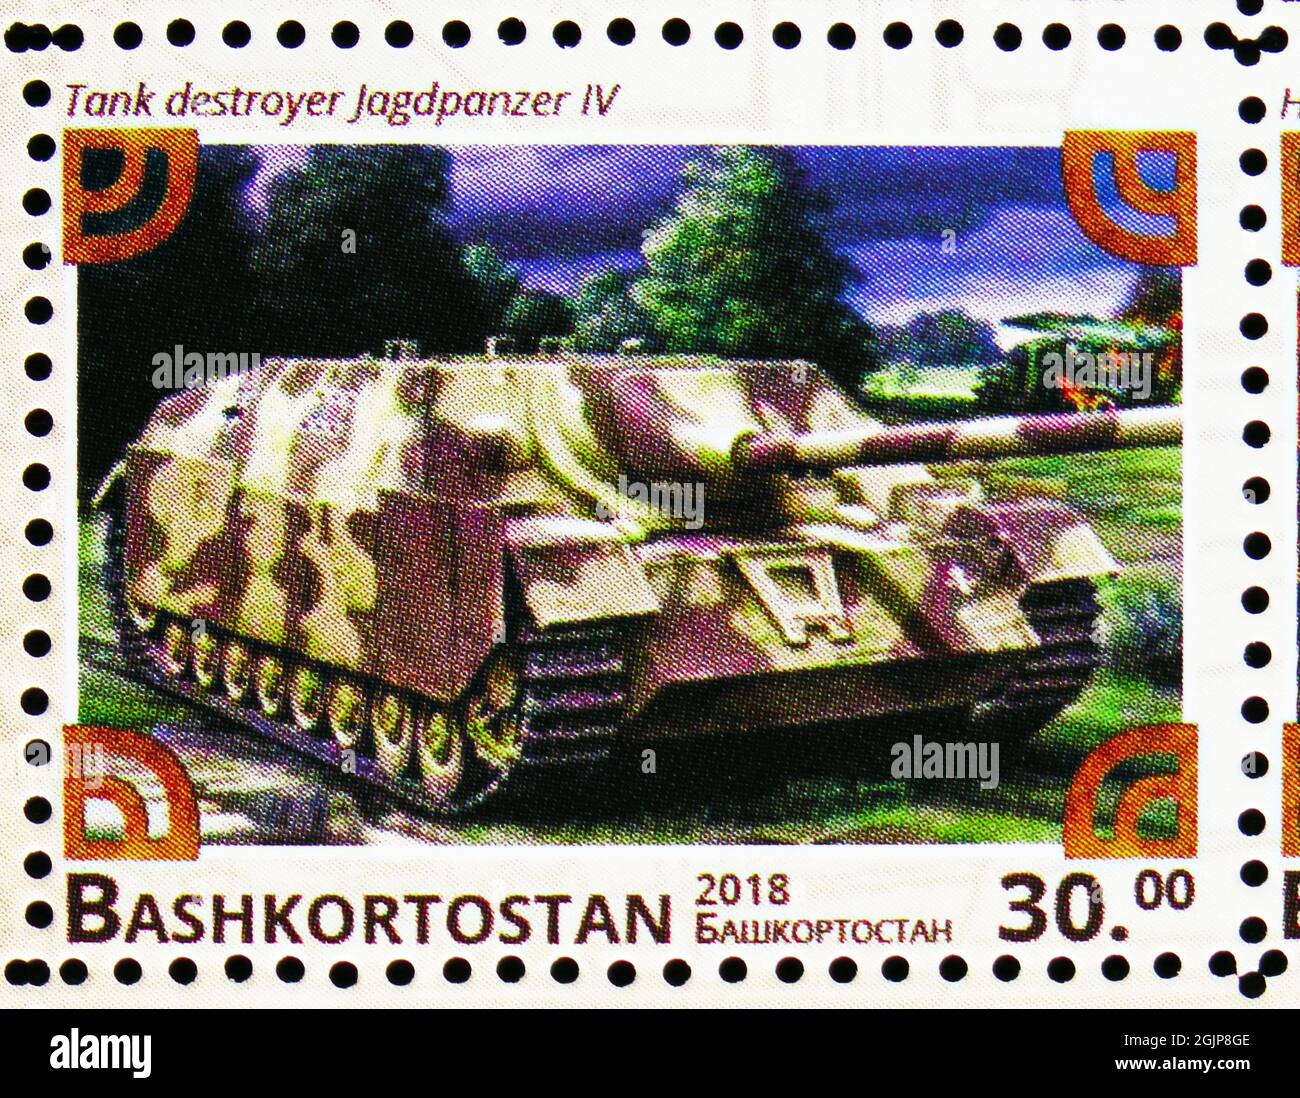 MOSCOW, RUSSIA - APRIL 17, 2021: Postage stamp printed in Cinderellas shows Tank destroyer Jagdpanzer IV, Russia: Bashkortostan serie, circa 2018 Stock Photo